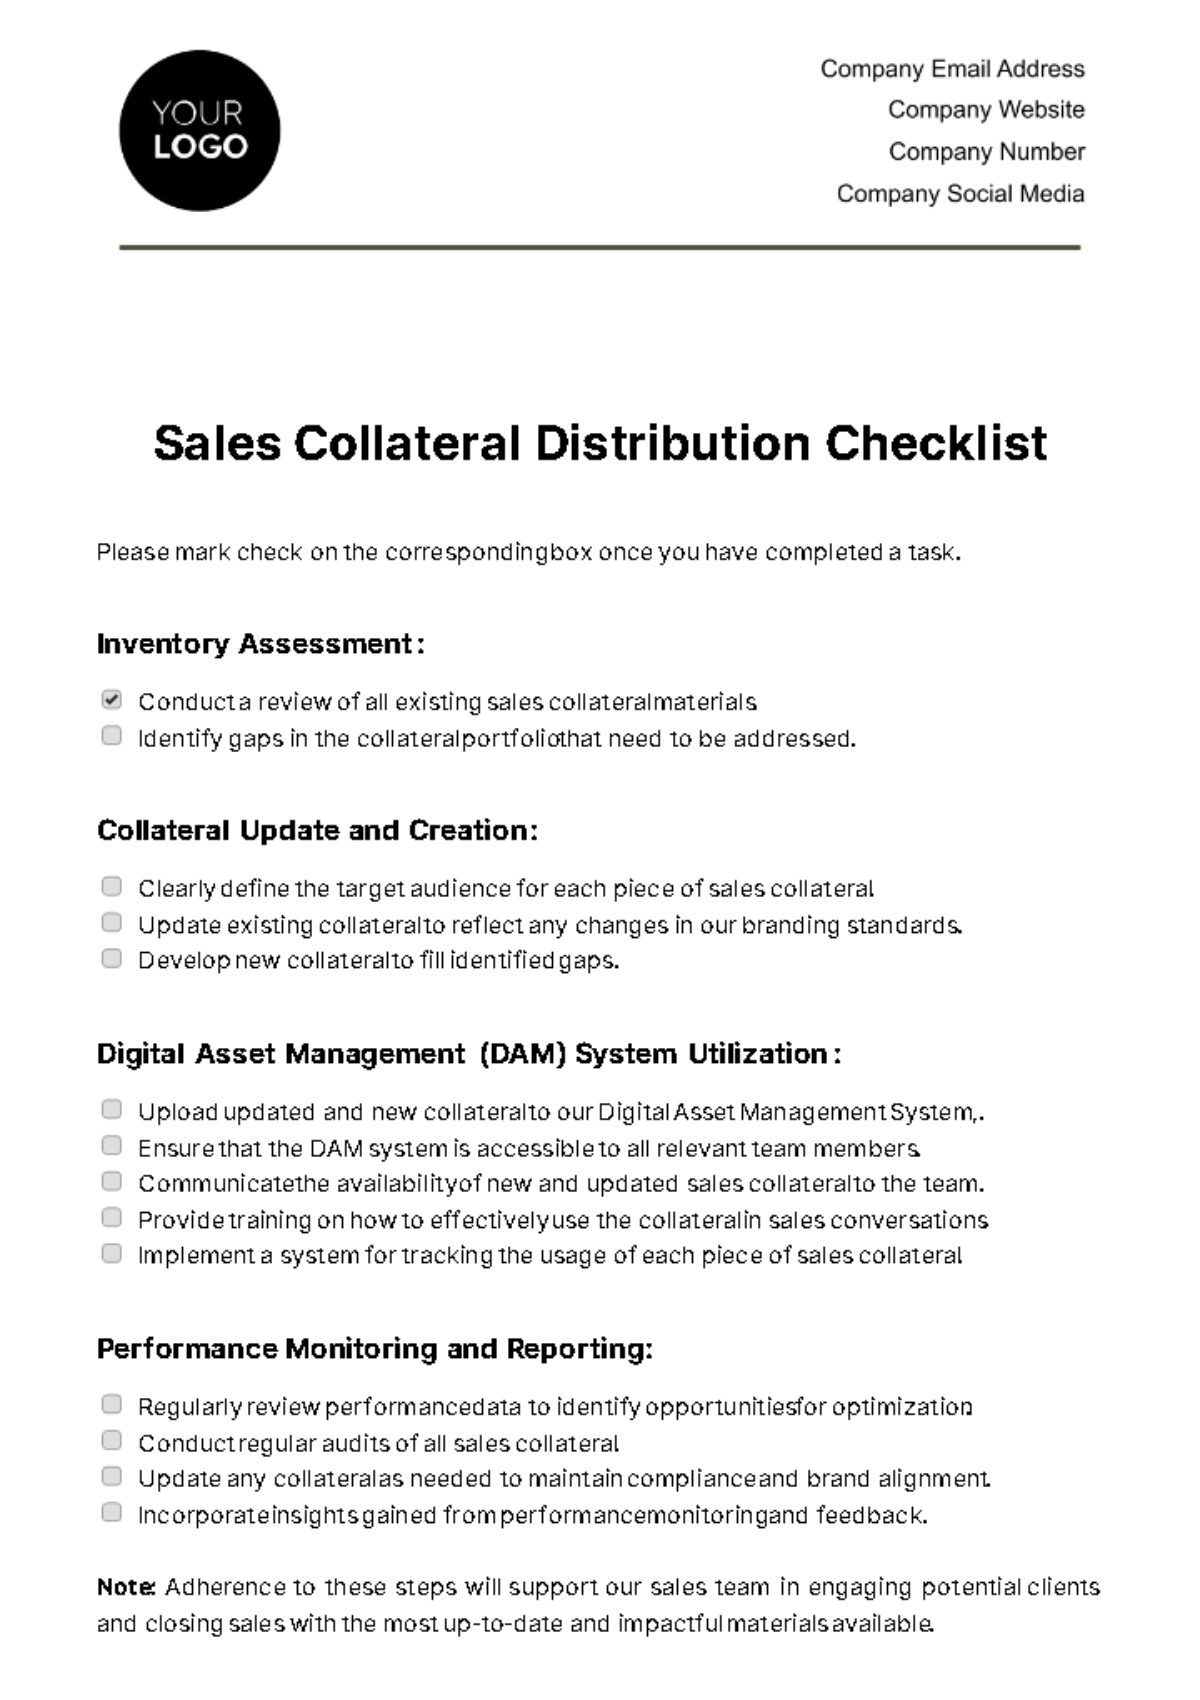 Free Sales Collateral Distribution Checklist Template